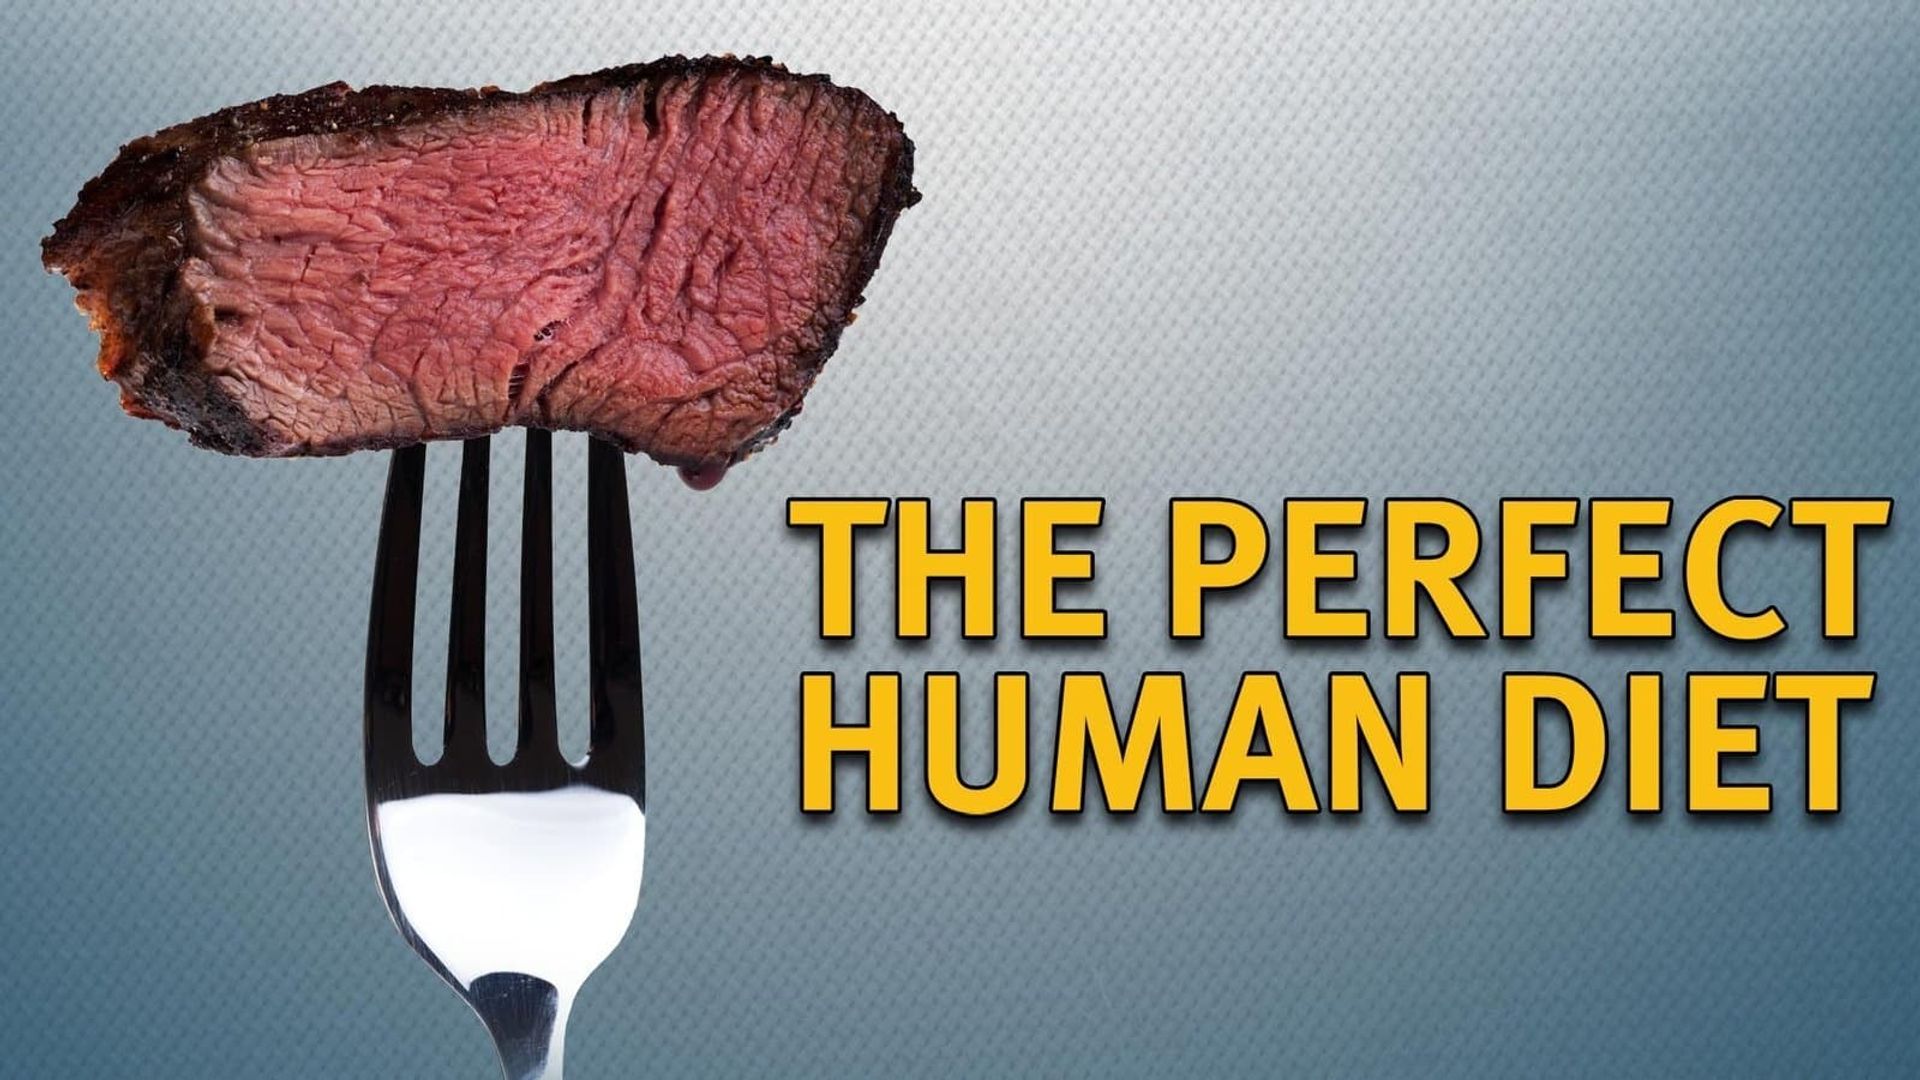 The Perfect Human Diet background